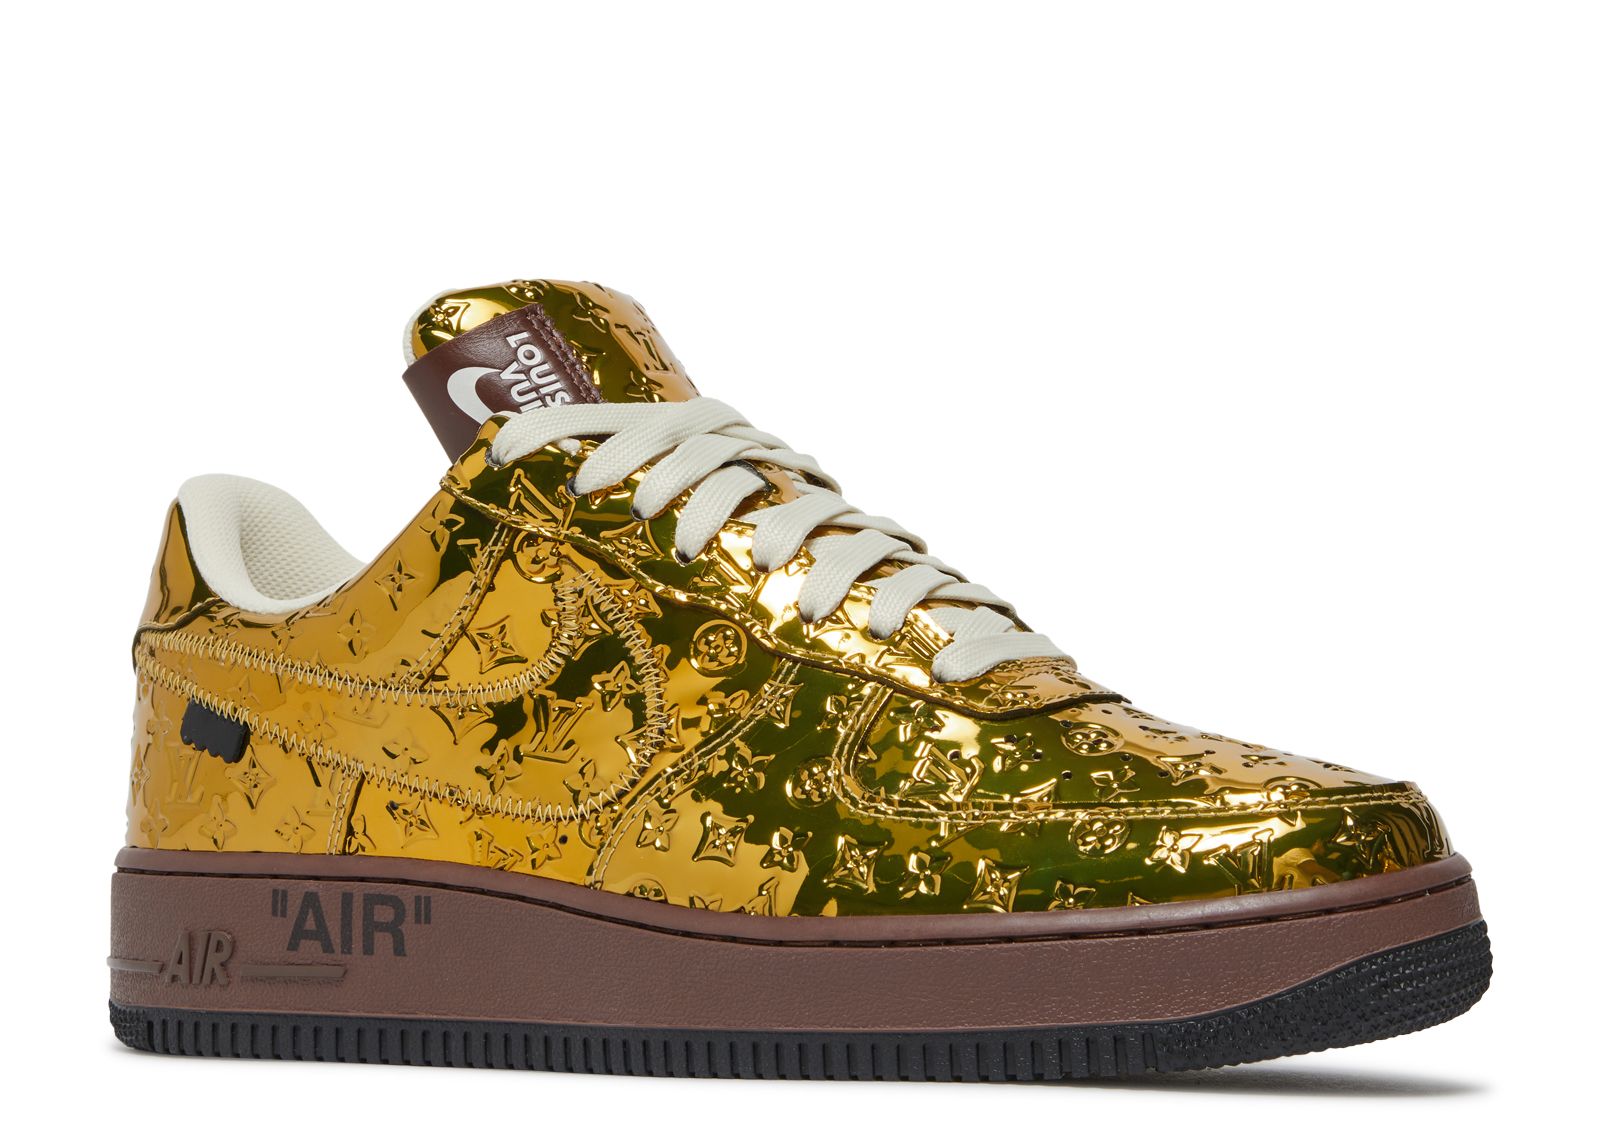 Louis Vuitton x Nike Air Force 1 July Release Info: Here's How to